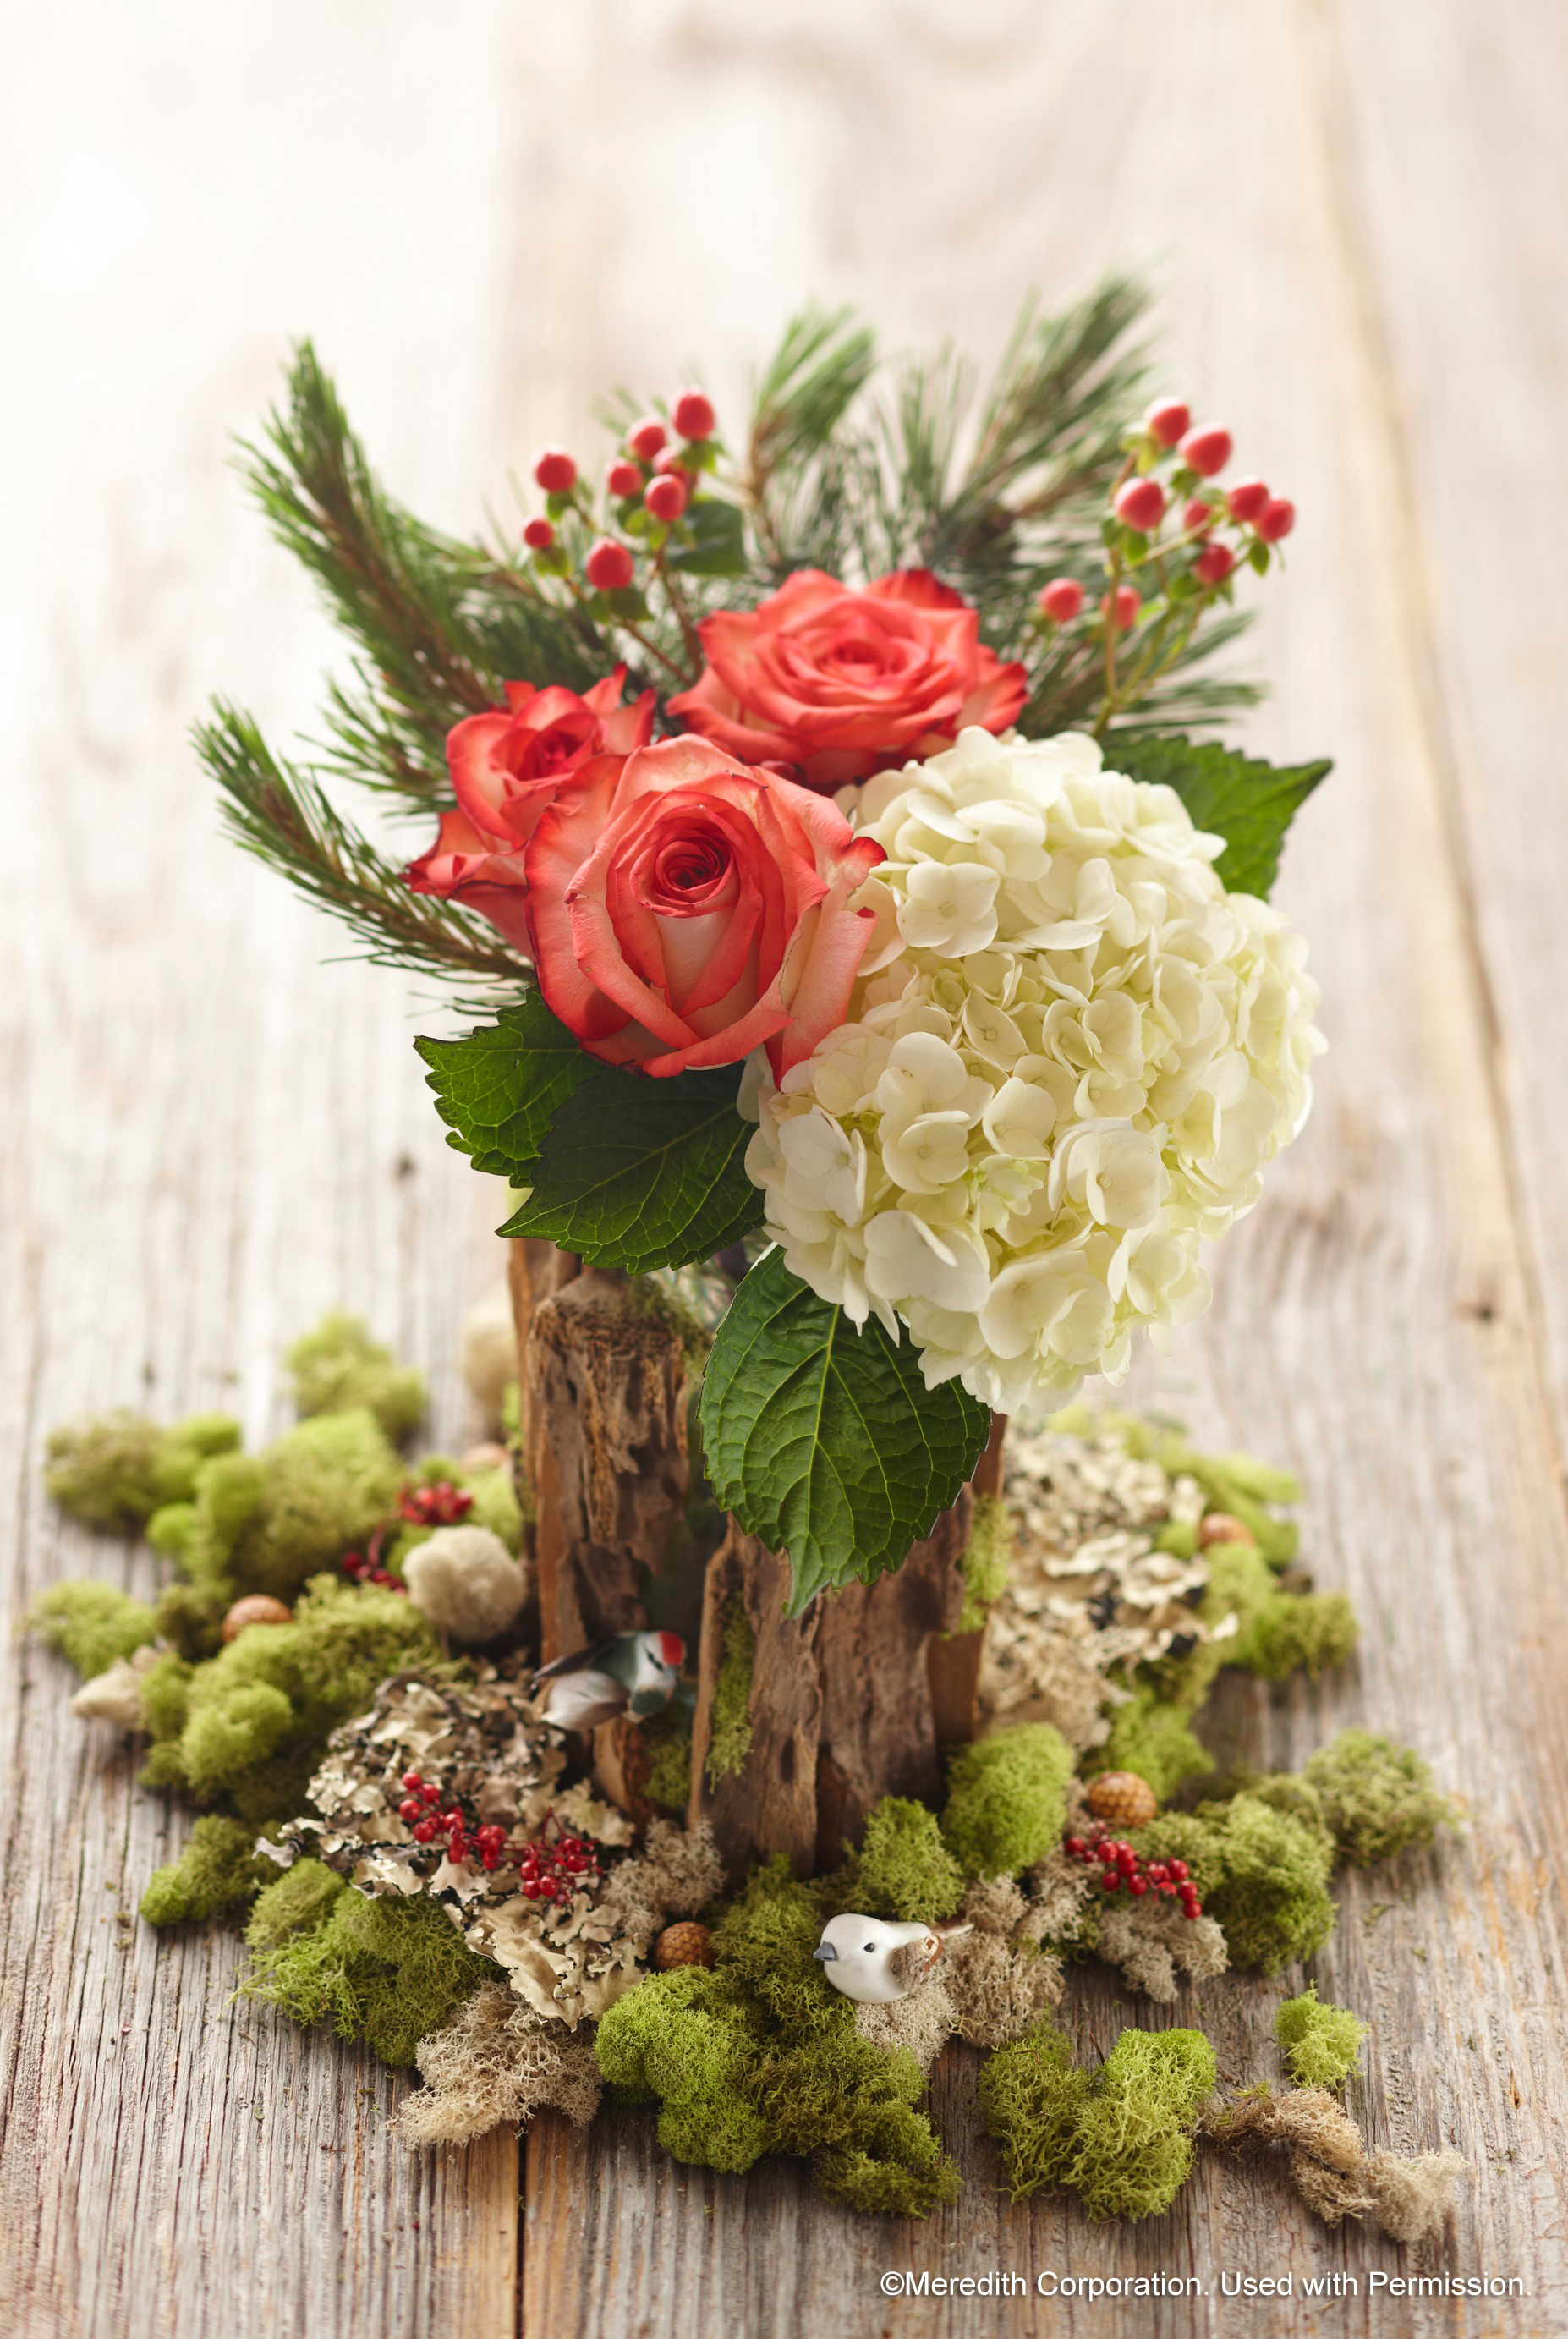 Create a Festive Appeal with Cut Flowers